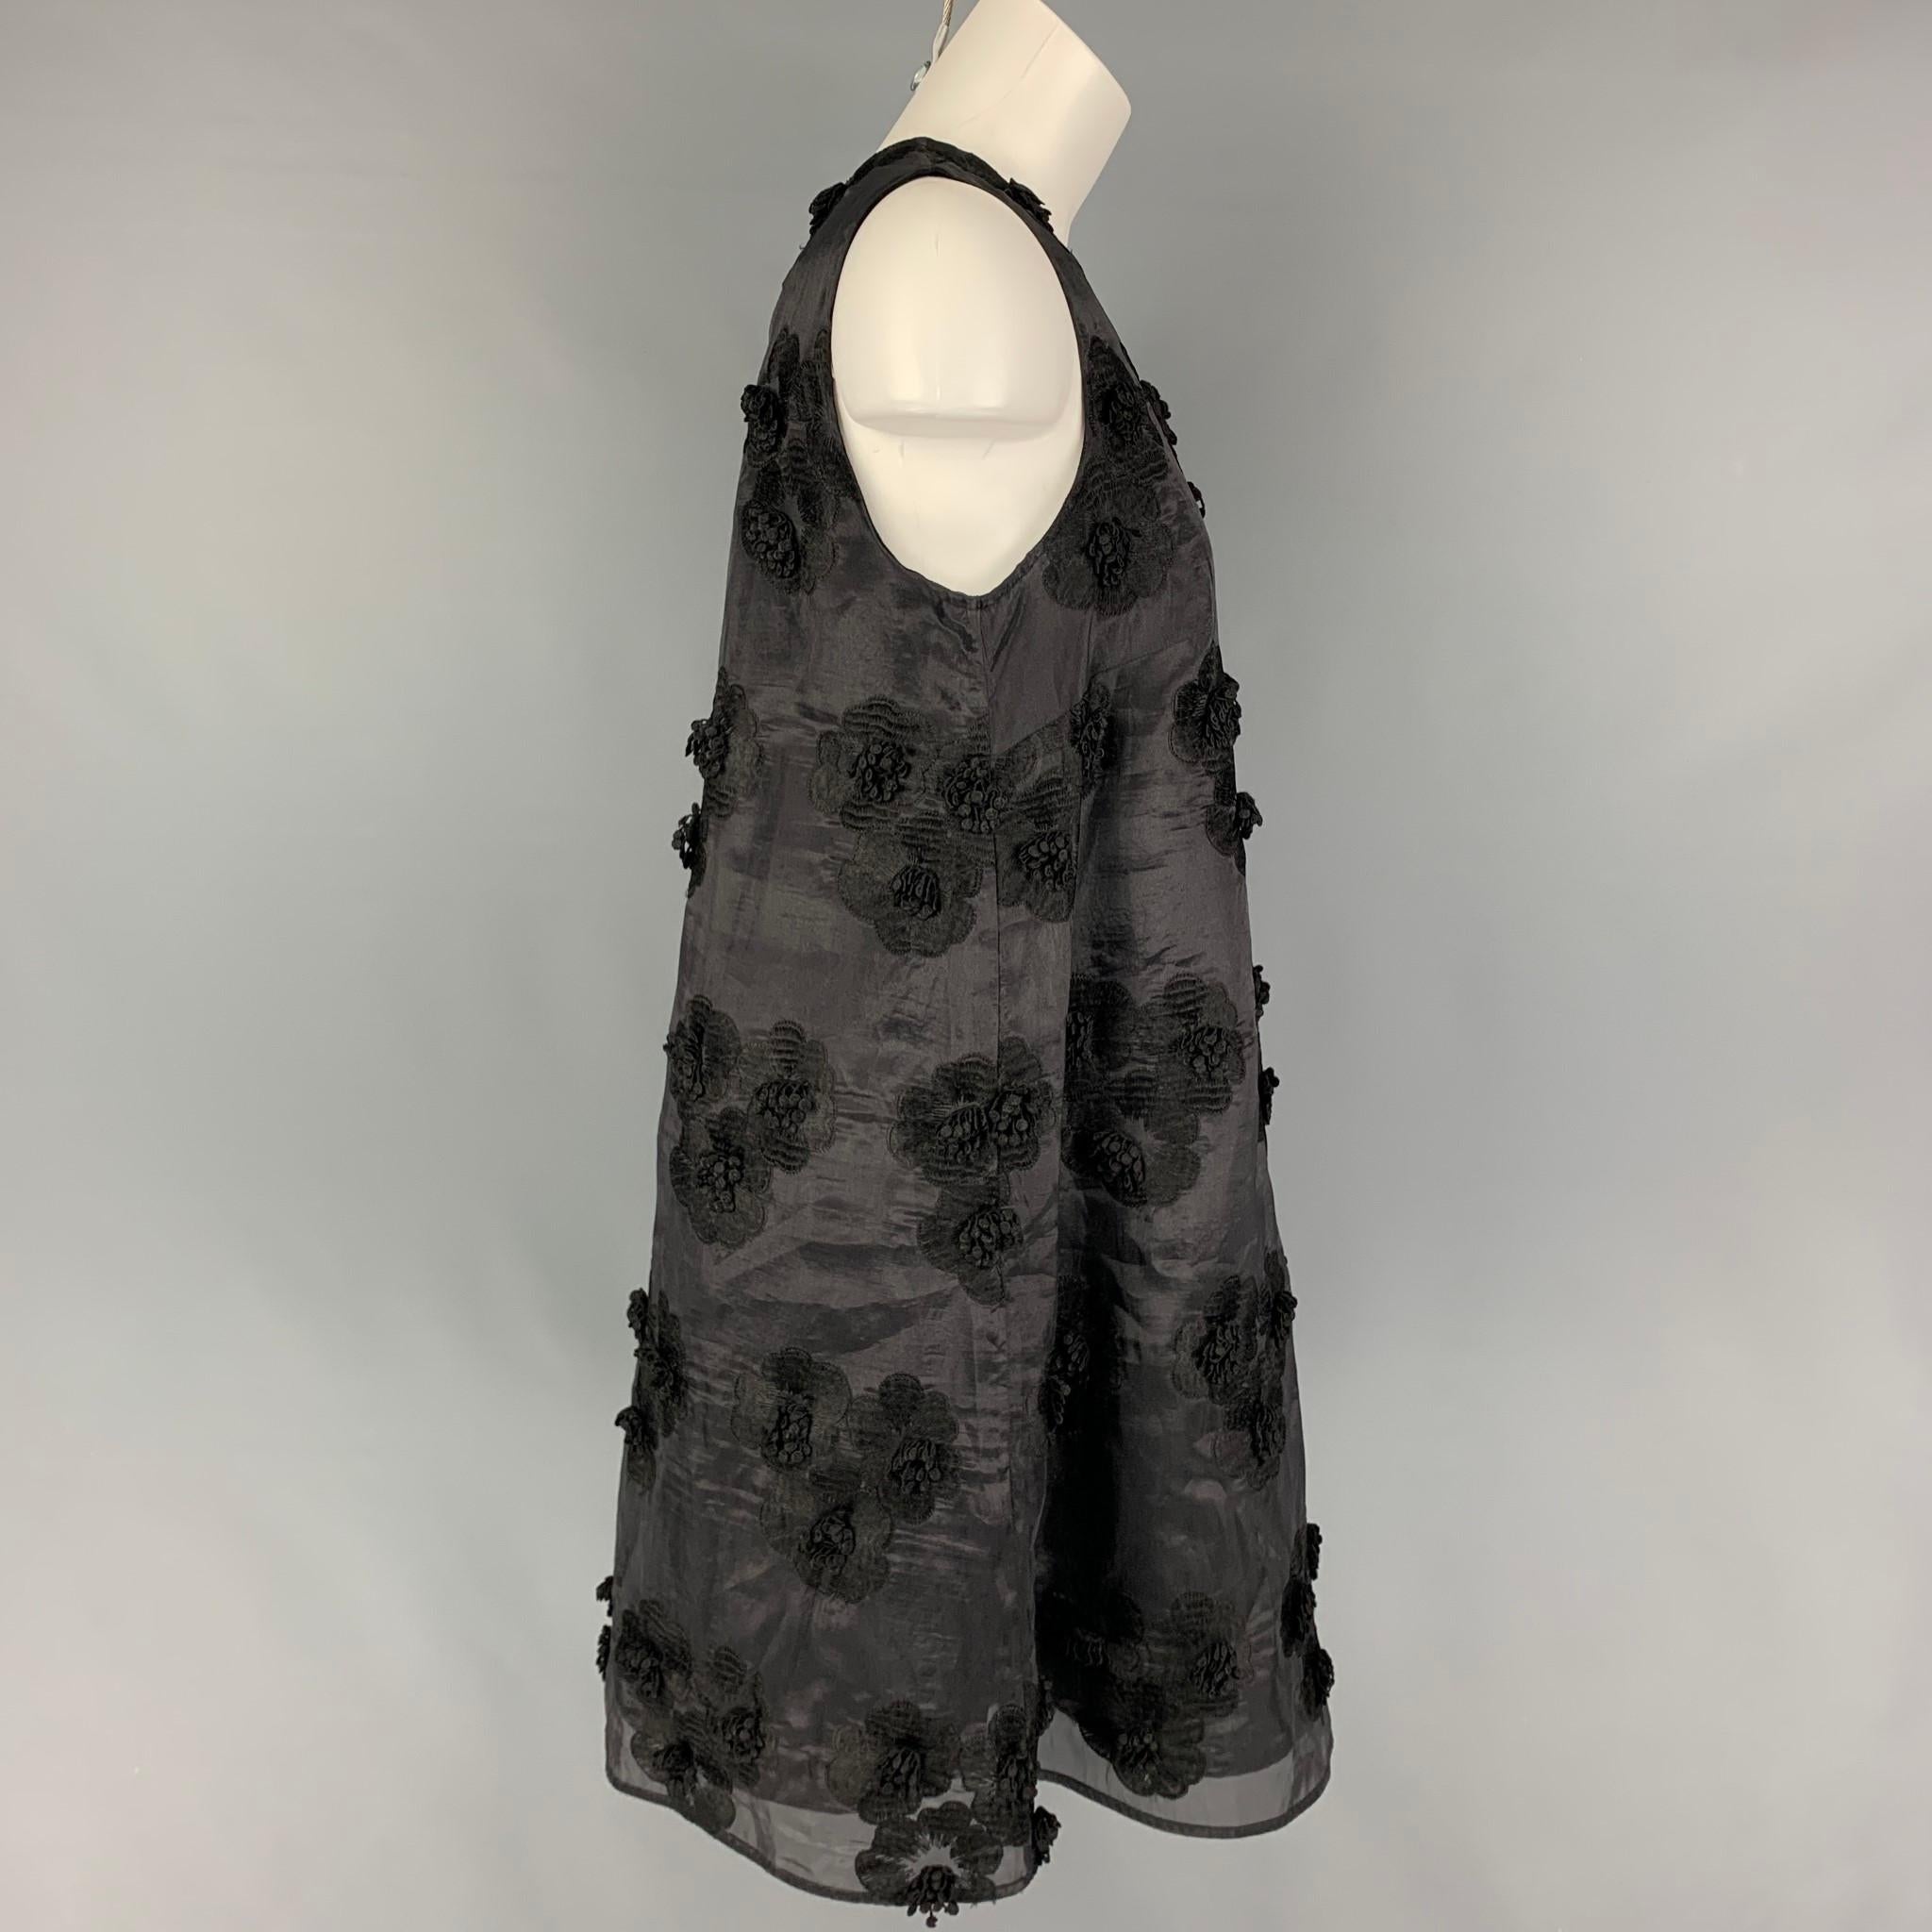 P.A.R.O.S.H dress comes in a black polyester with floral applique details featuring a shift style, sleeveless, and a back zip up closure.

Very Good Pre-Owned Condition.
Marked: L

Measurements:

Shoulder: 13.5 in.
Bust: 38 in.
Hip: 46 in.
Length: